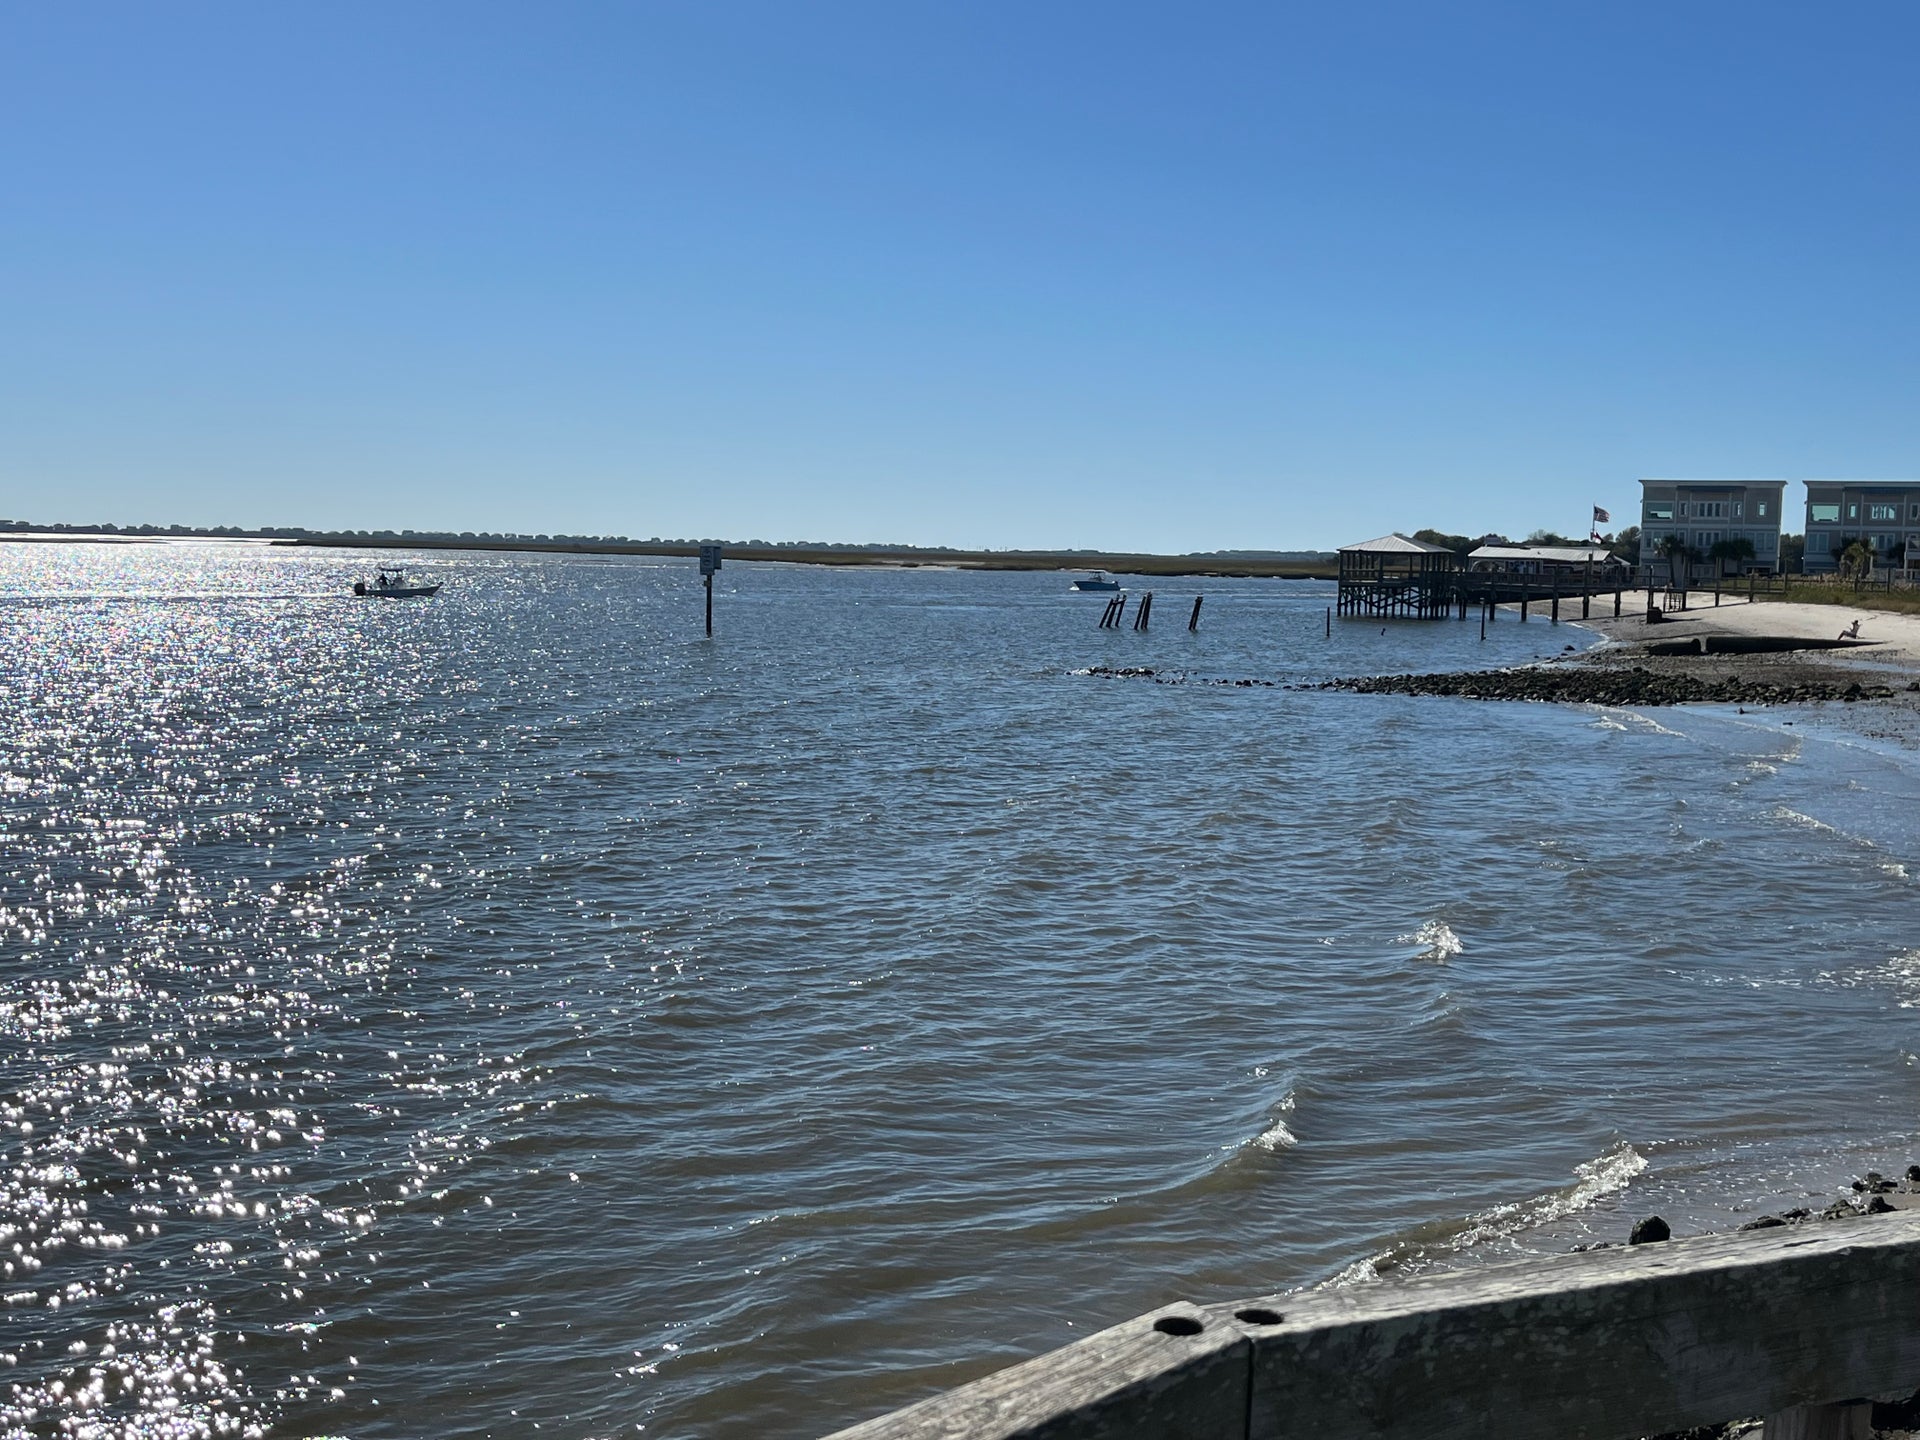 Chesapeake Homes Discover the hidden gem of Southport, NC just a stone's throw away!